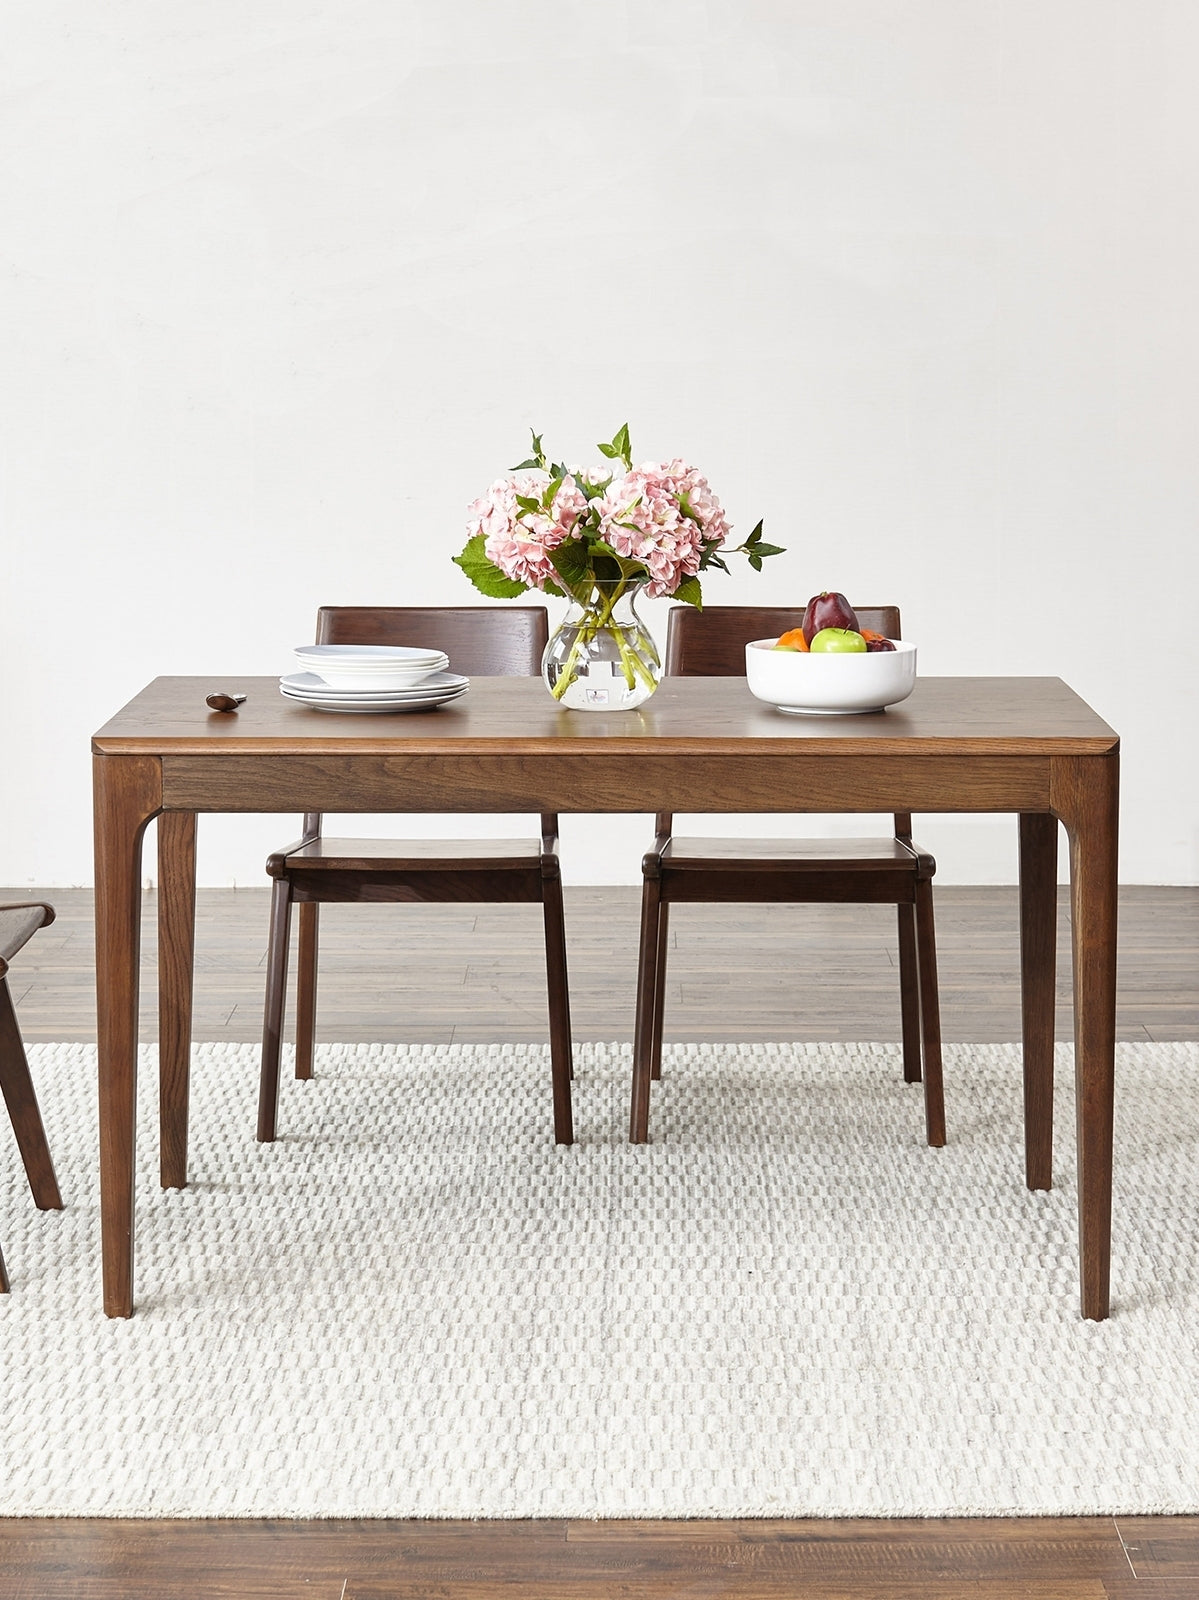 JAKIRA Japanese Nordic Scandinavian Solid Wood Dining Table and Chair